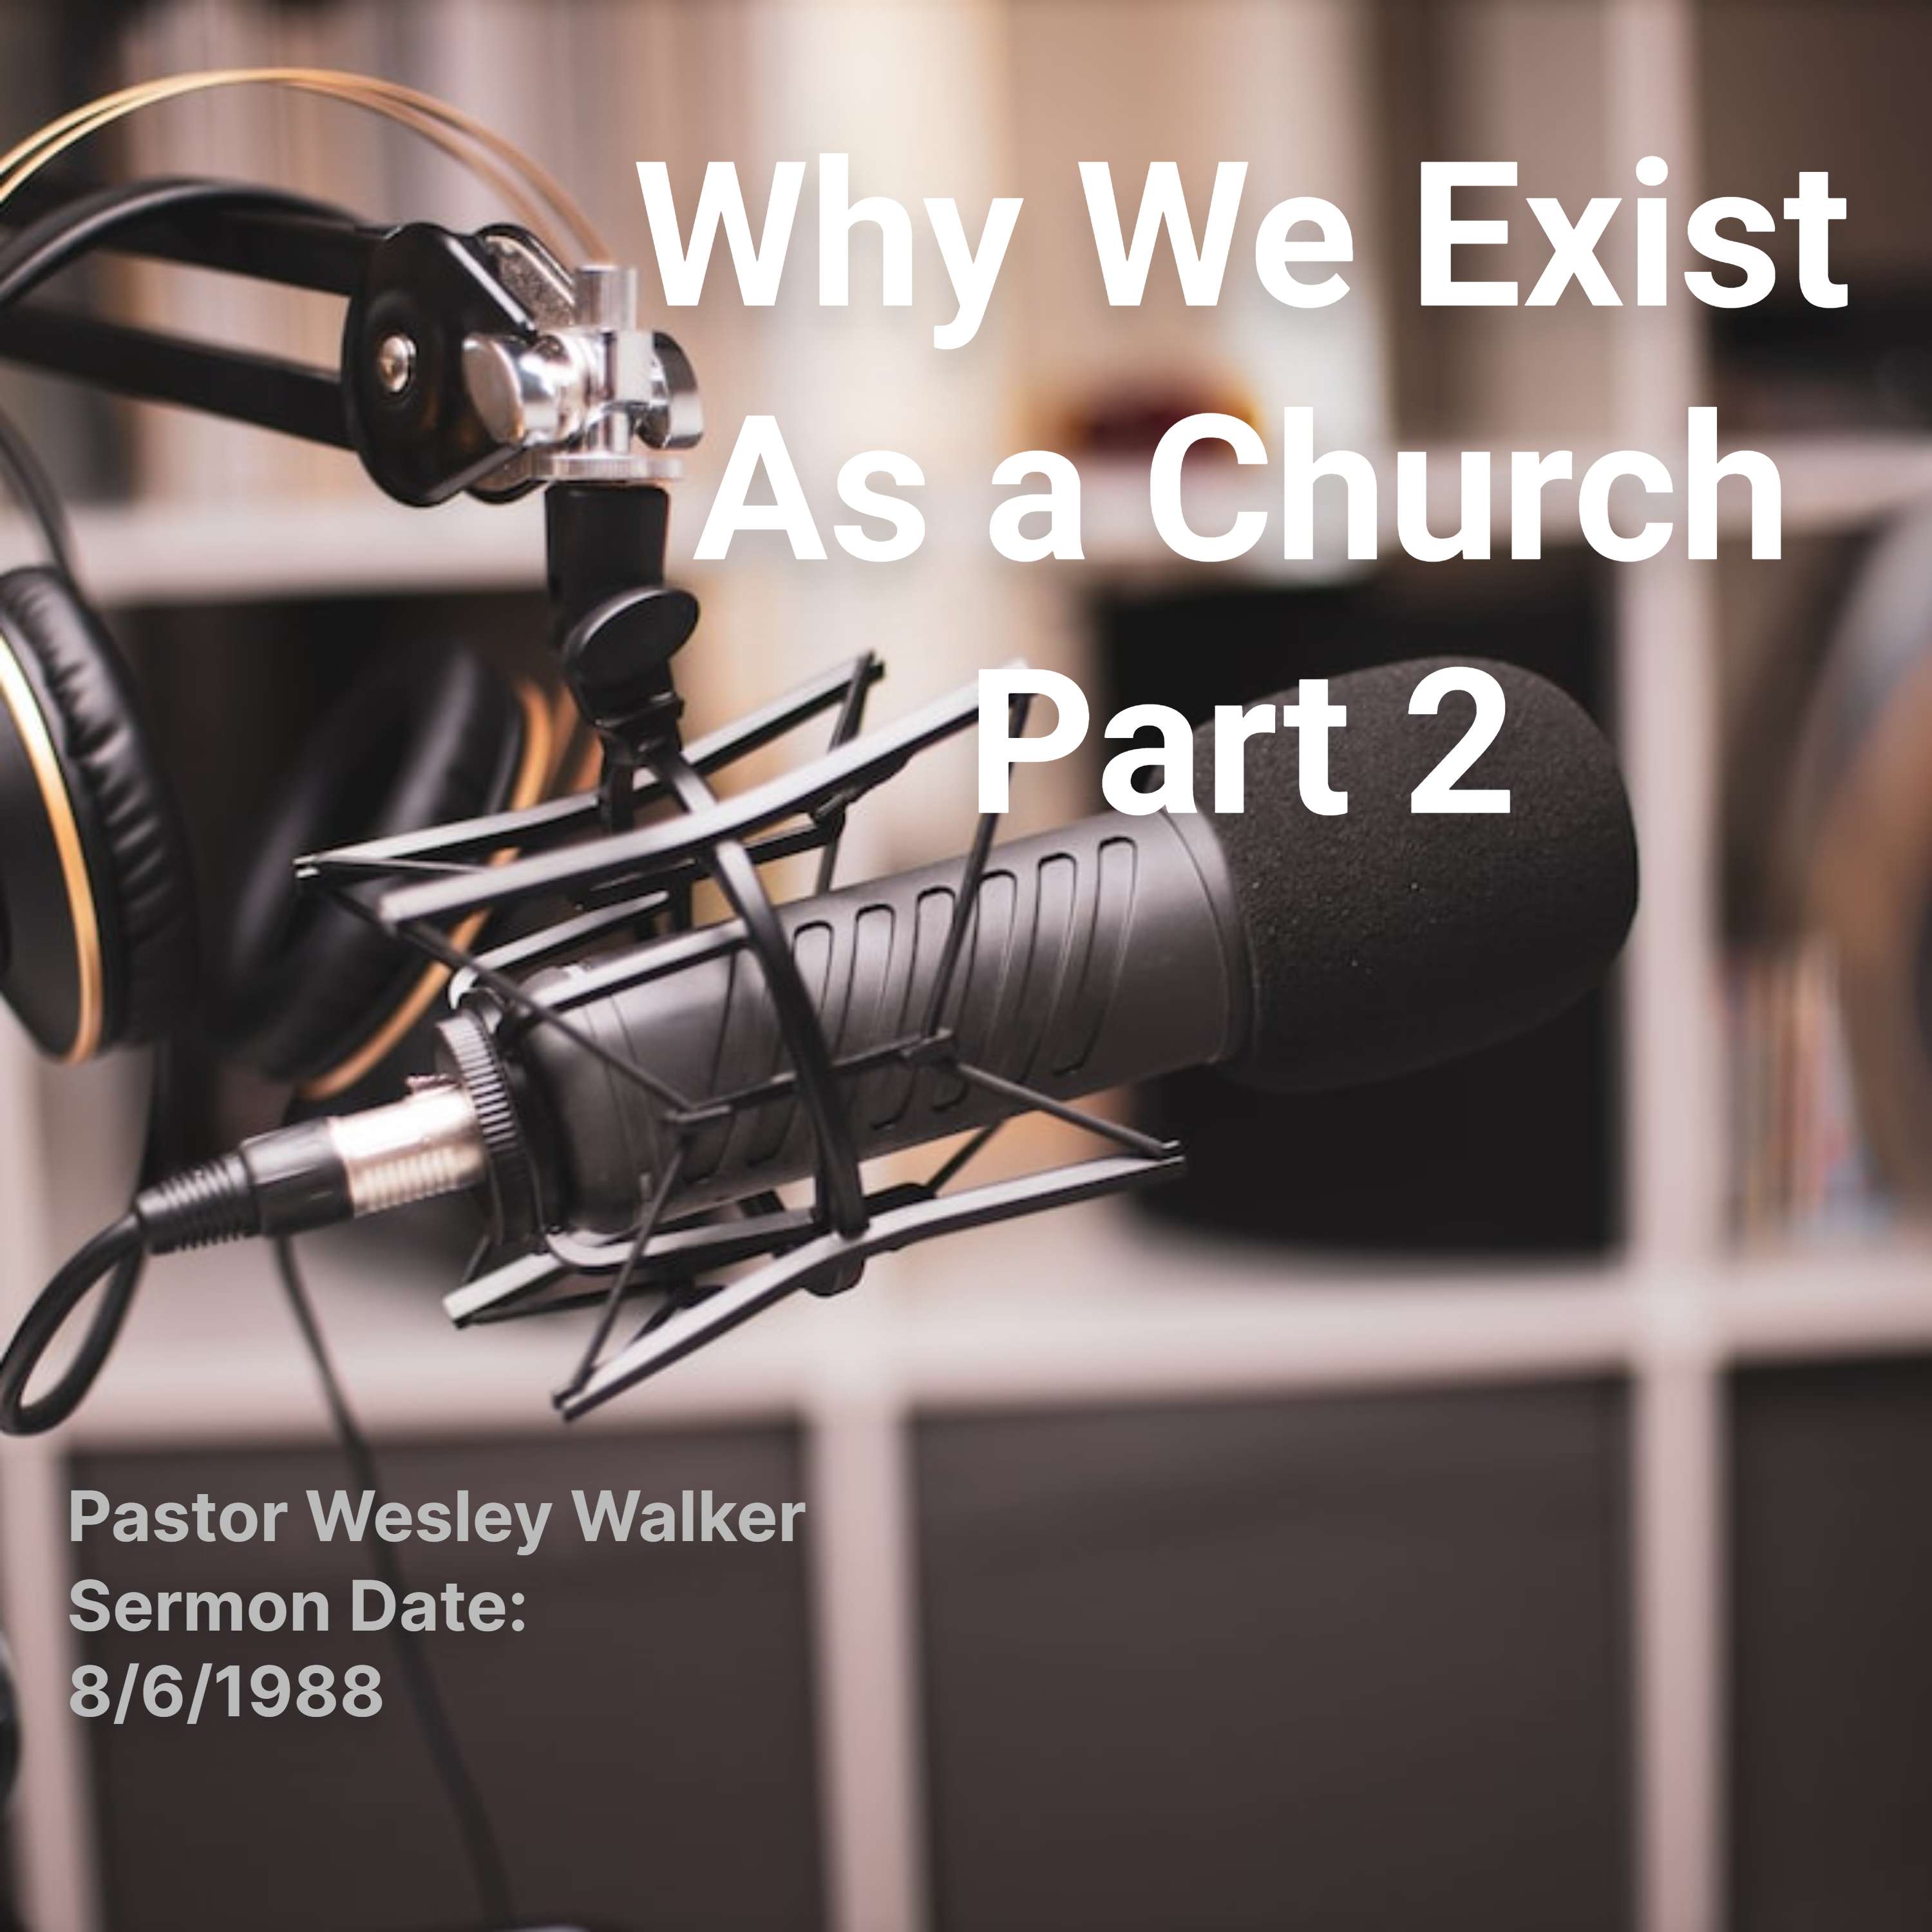 Why We Exist As a Church - Part 2